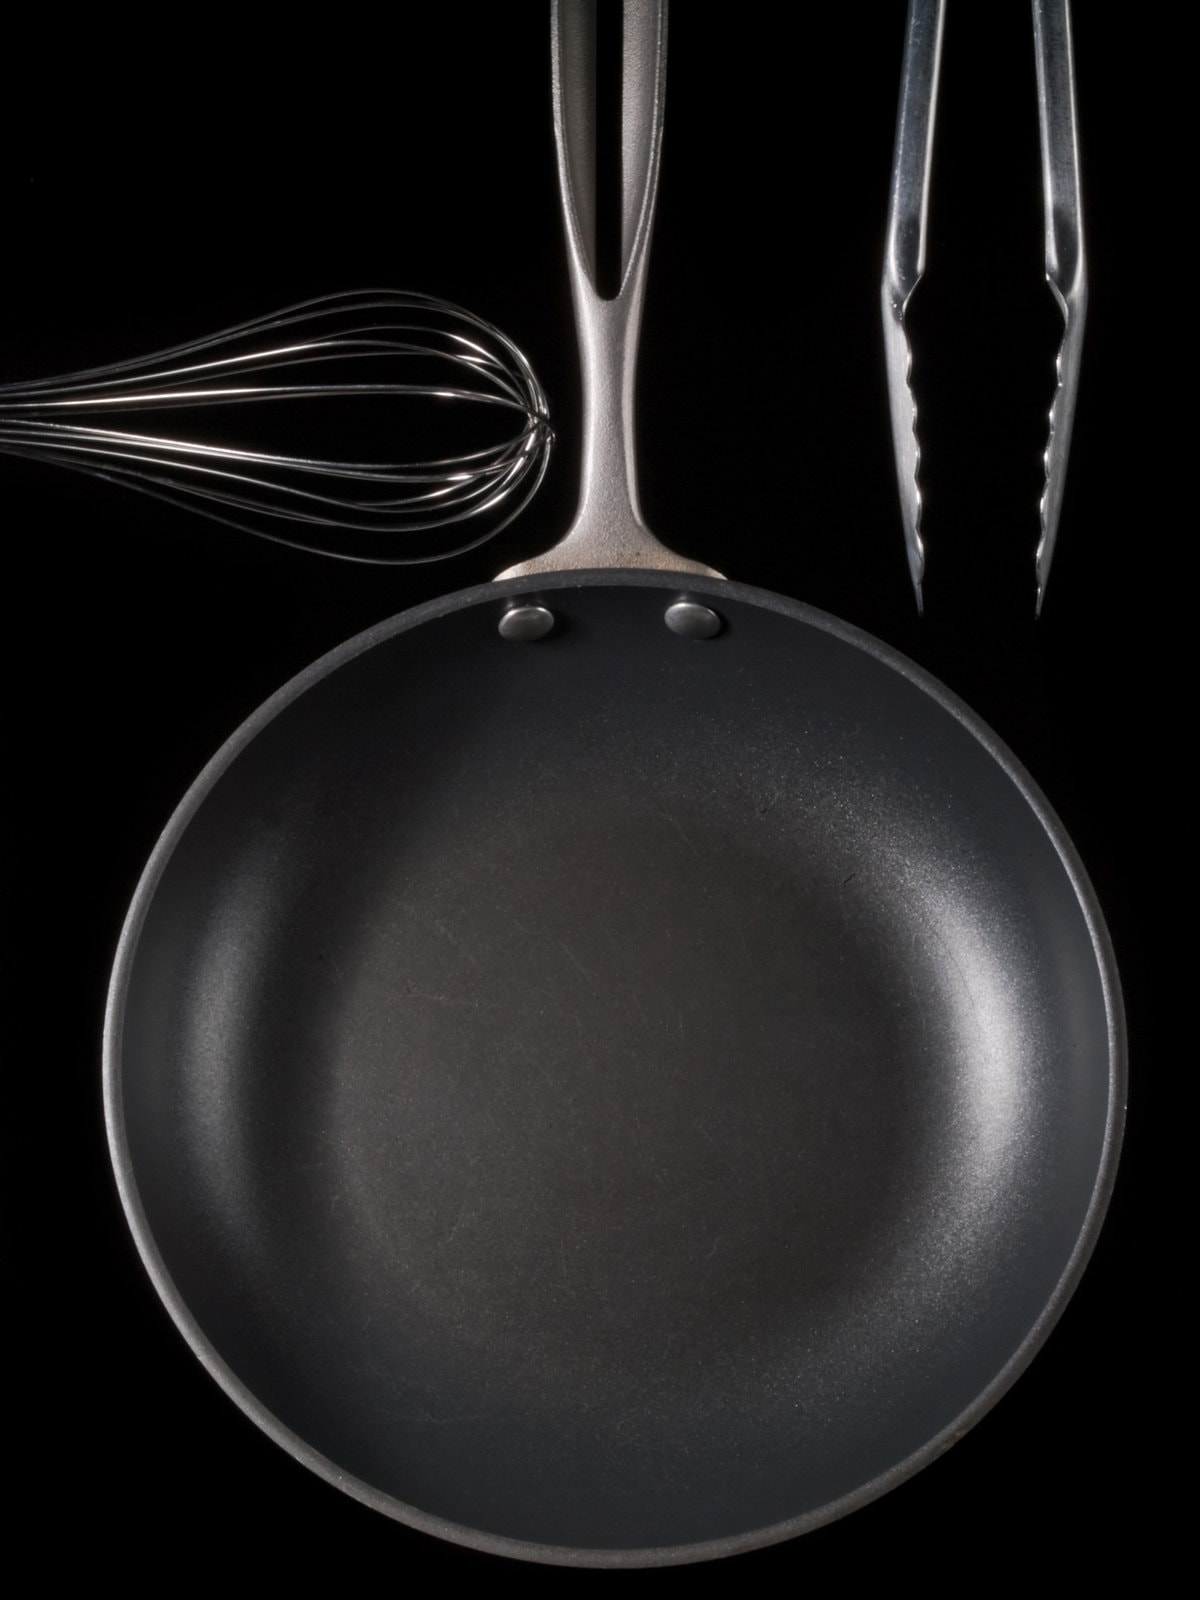 Frying pan, whisk &amp pair of tongs on black background